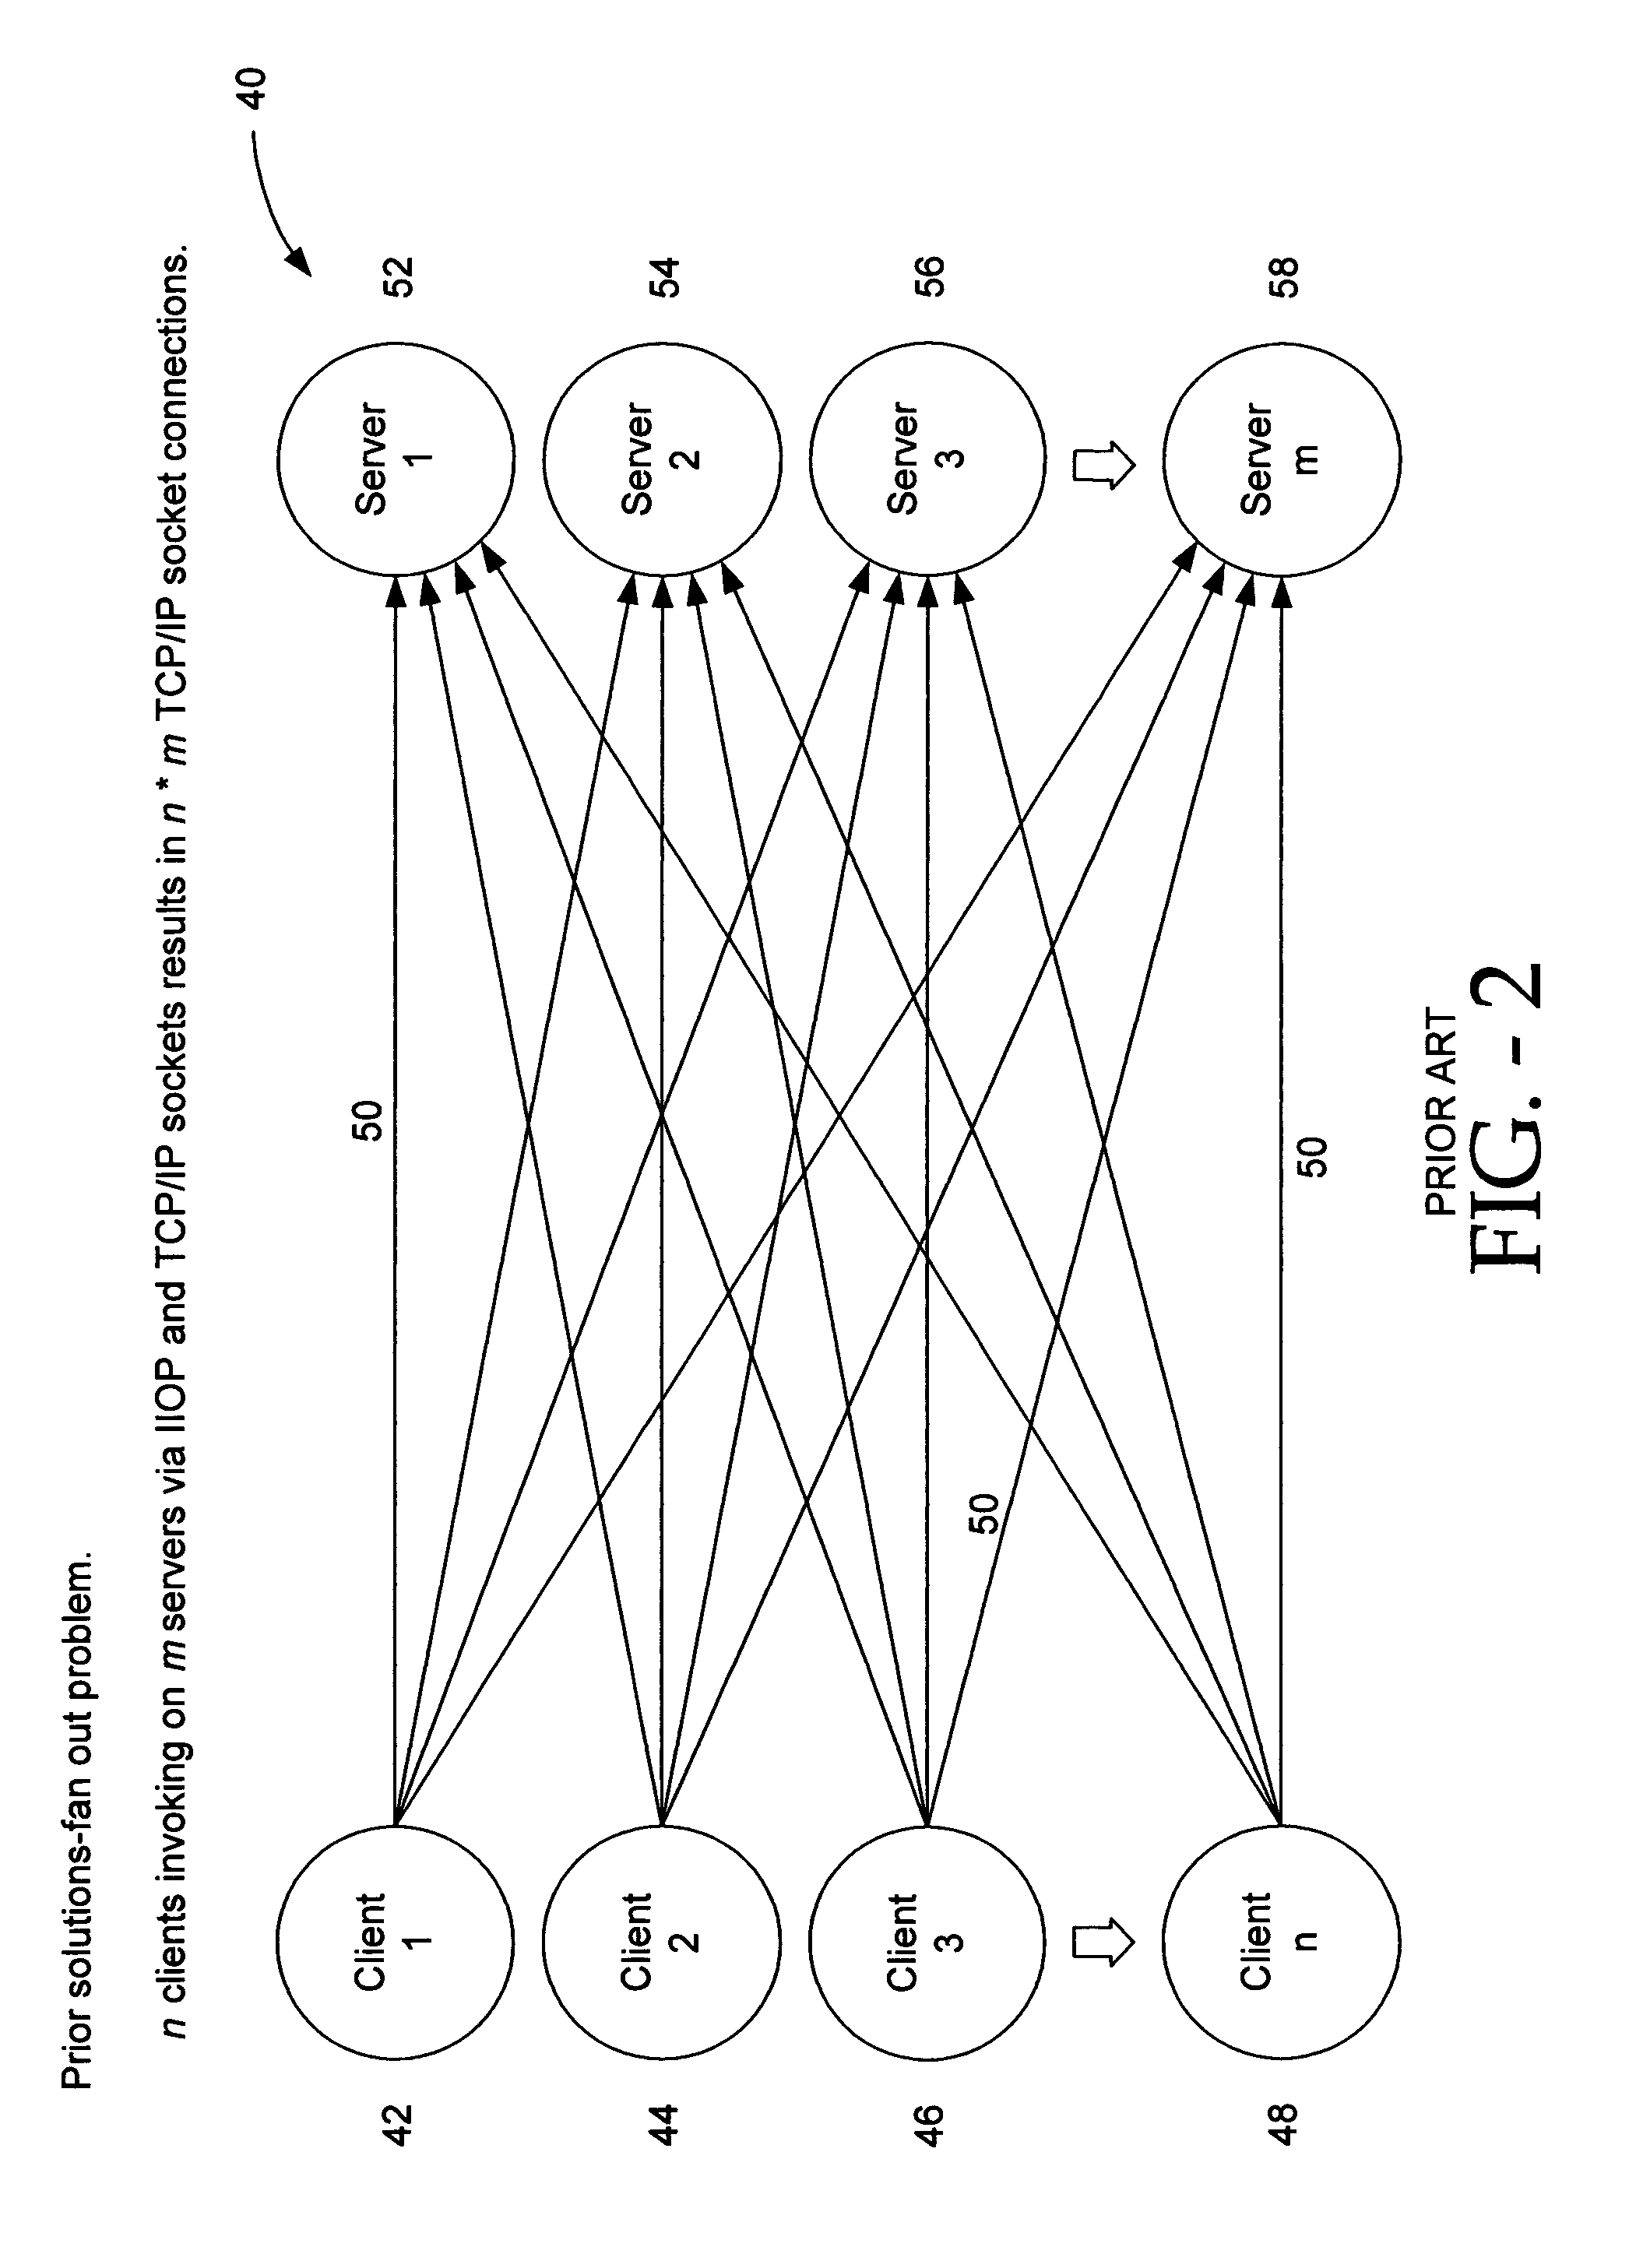 System and method for concentration and load-balancing of requests